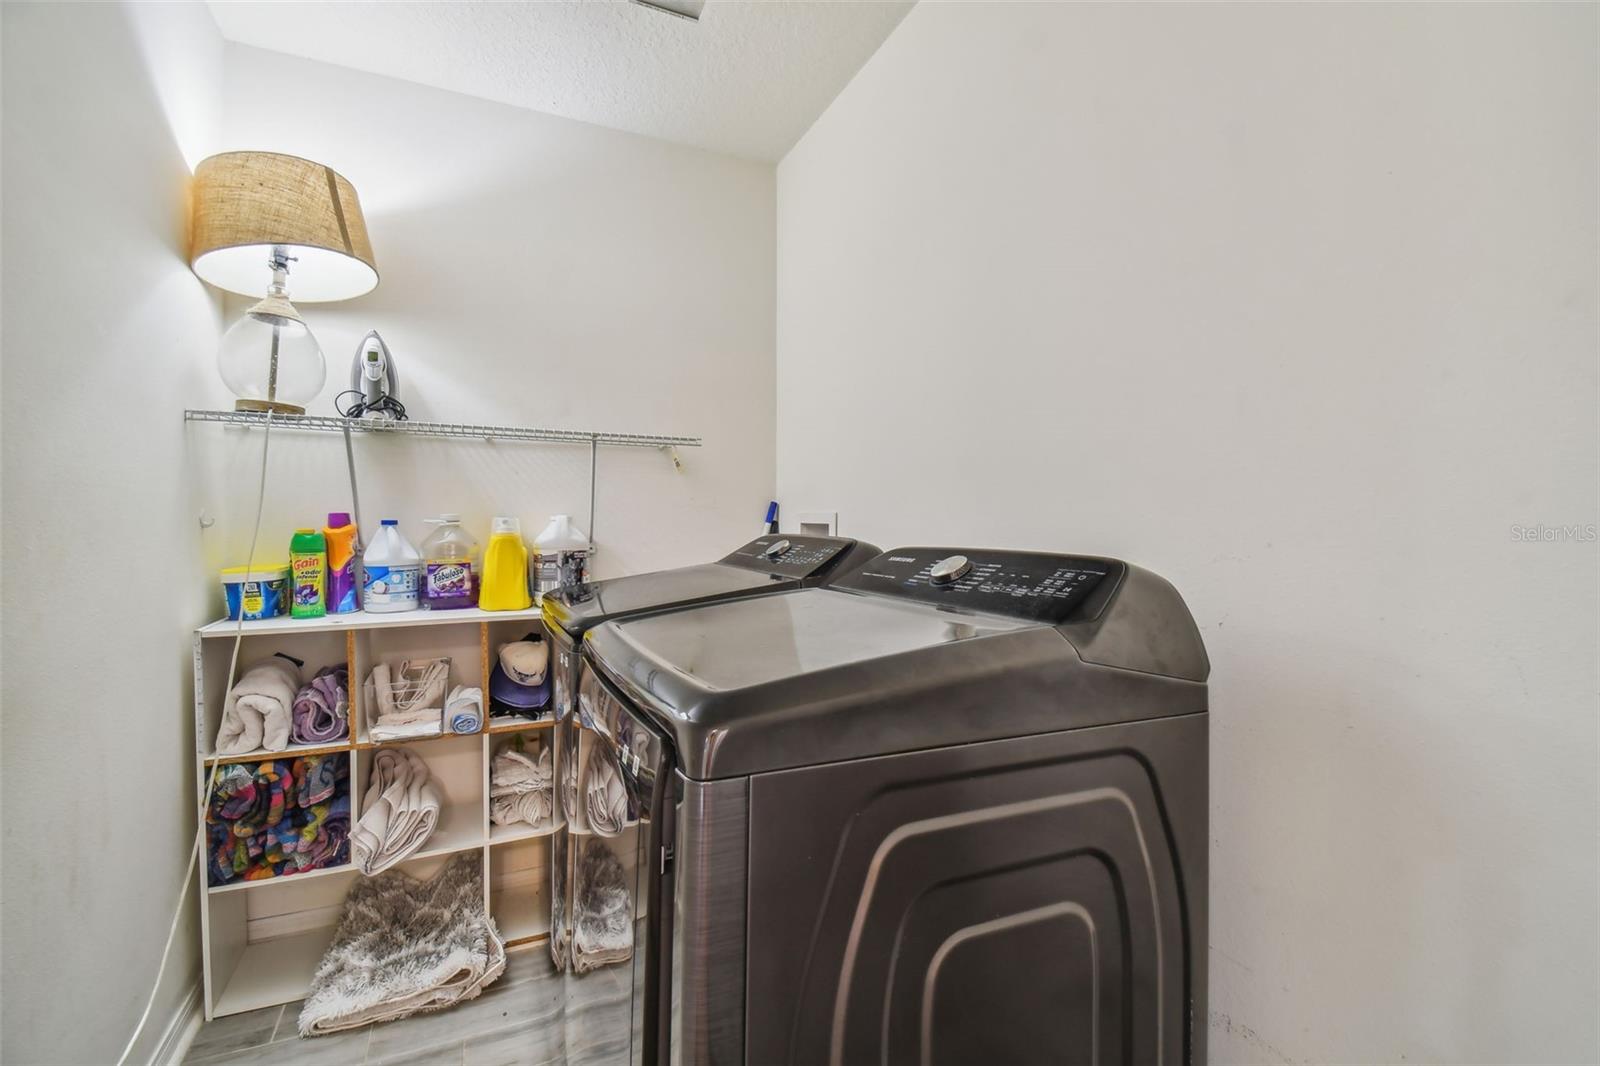 WALK IN LAUNDRY ROOM - SAMSUNG WASHER AND DRYER INCLUDED